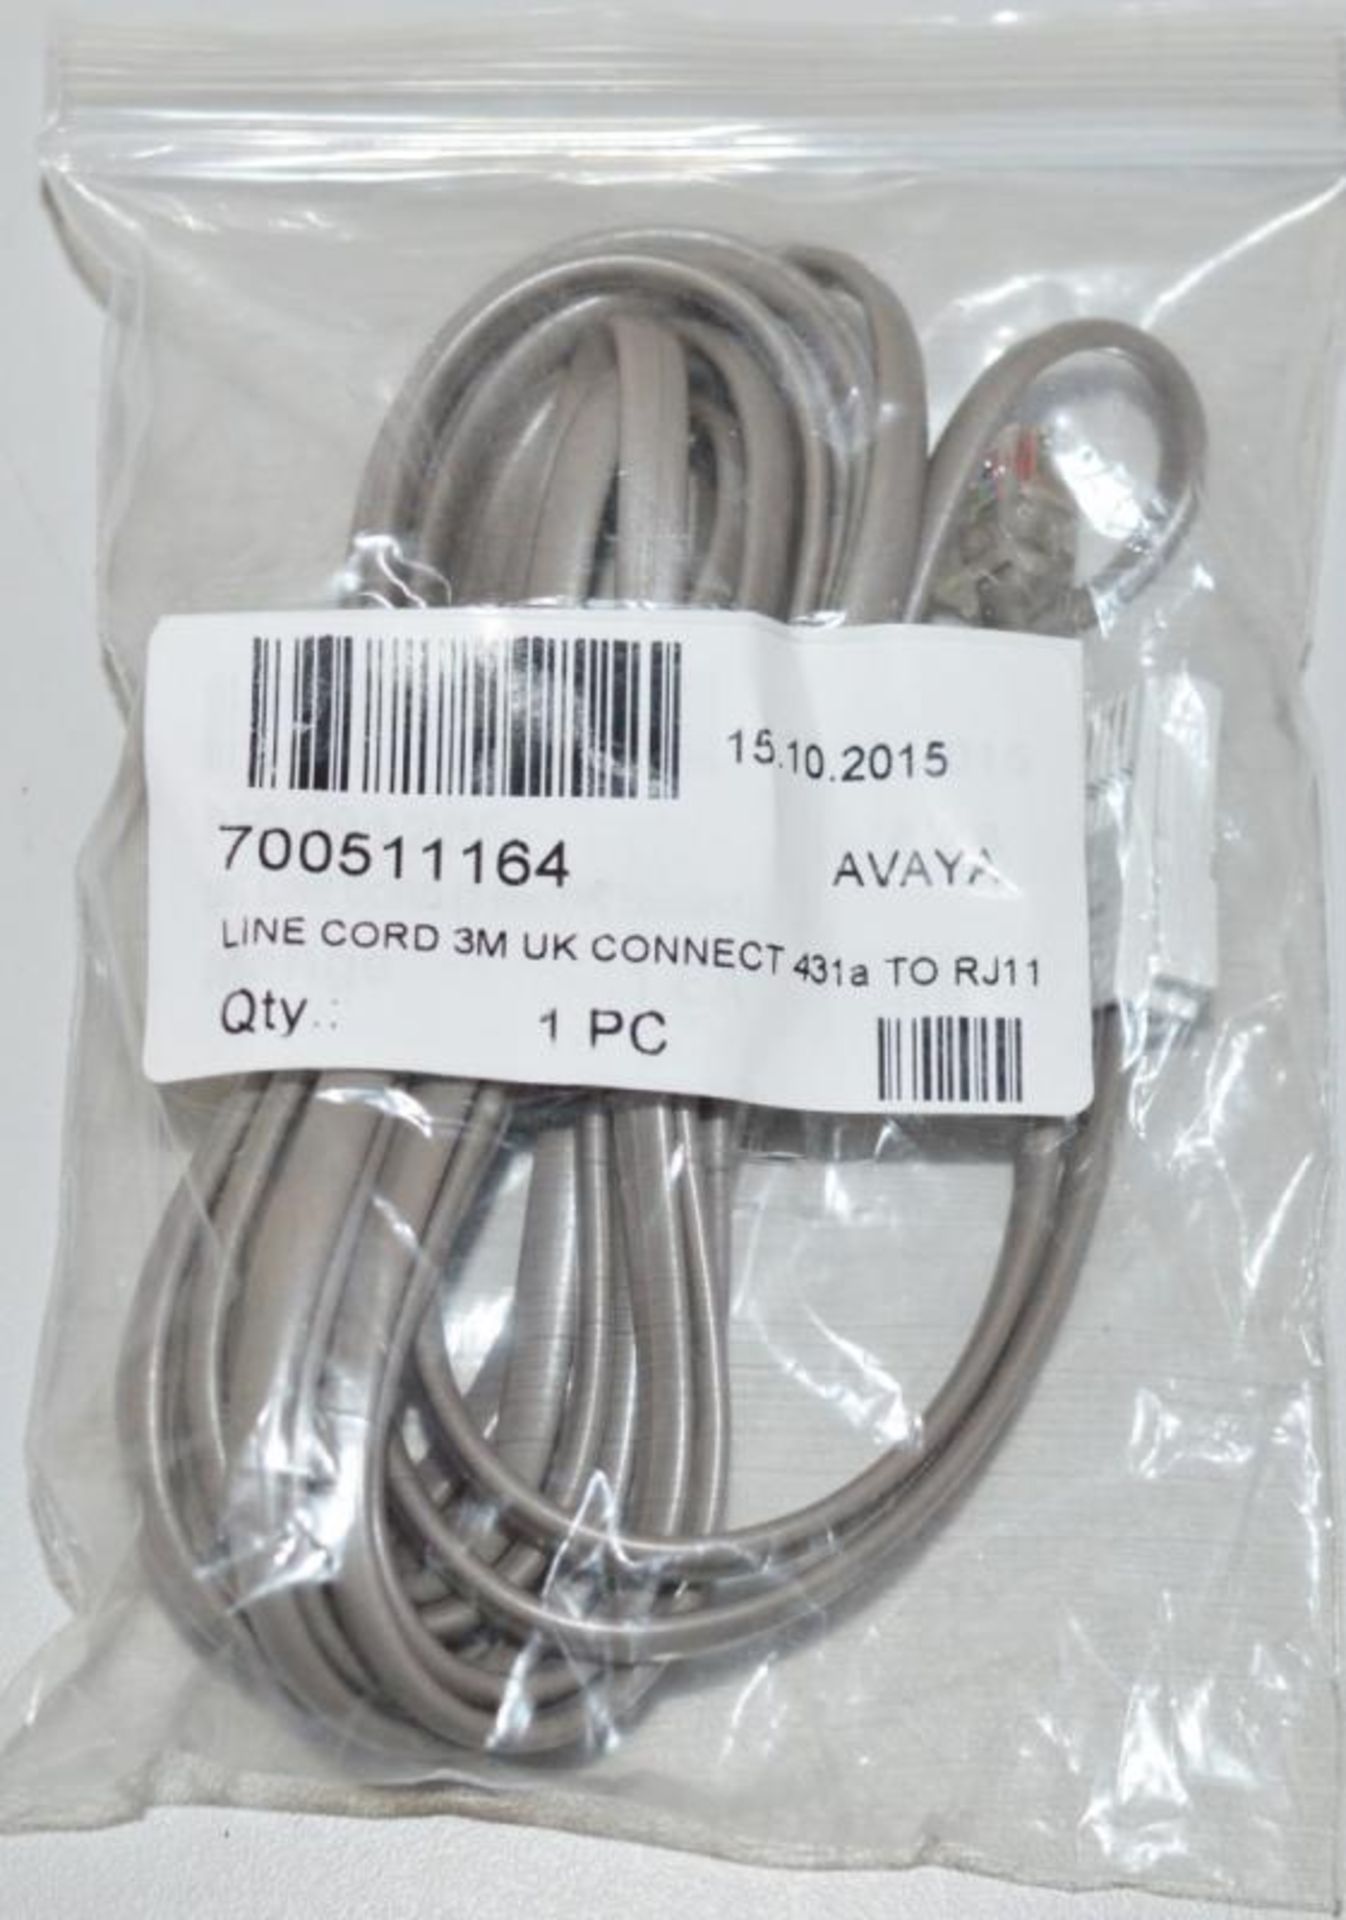 44 x Avaya Line Cord 3m UK Connect Telephone Cables - 41A to RJ11 - Brand New Stock - CL249 - Locati - Image 3 of 3